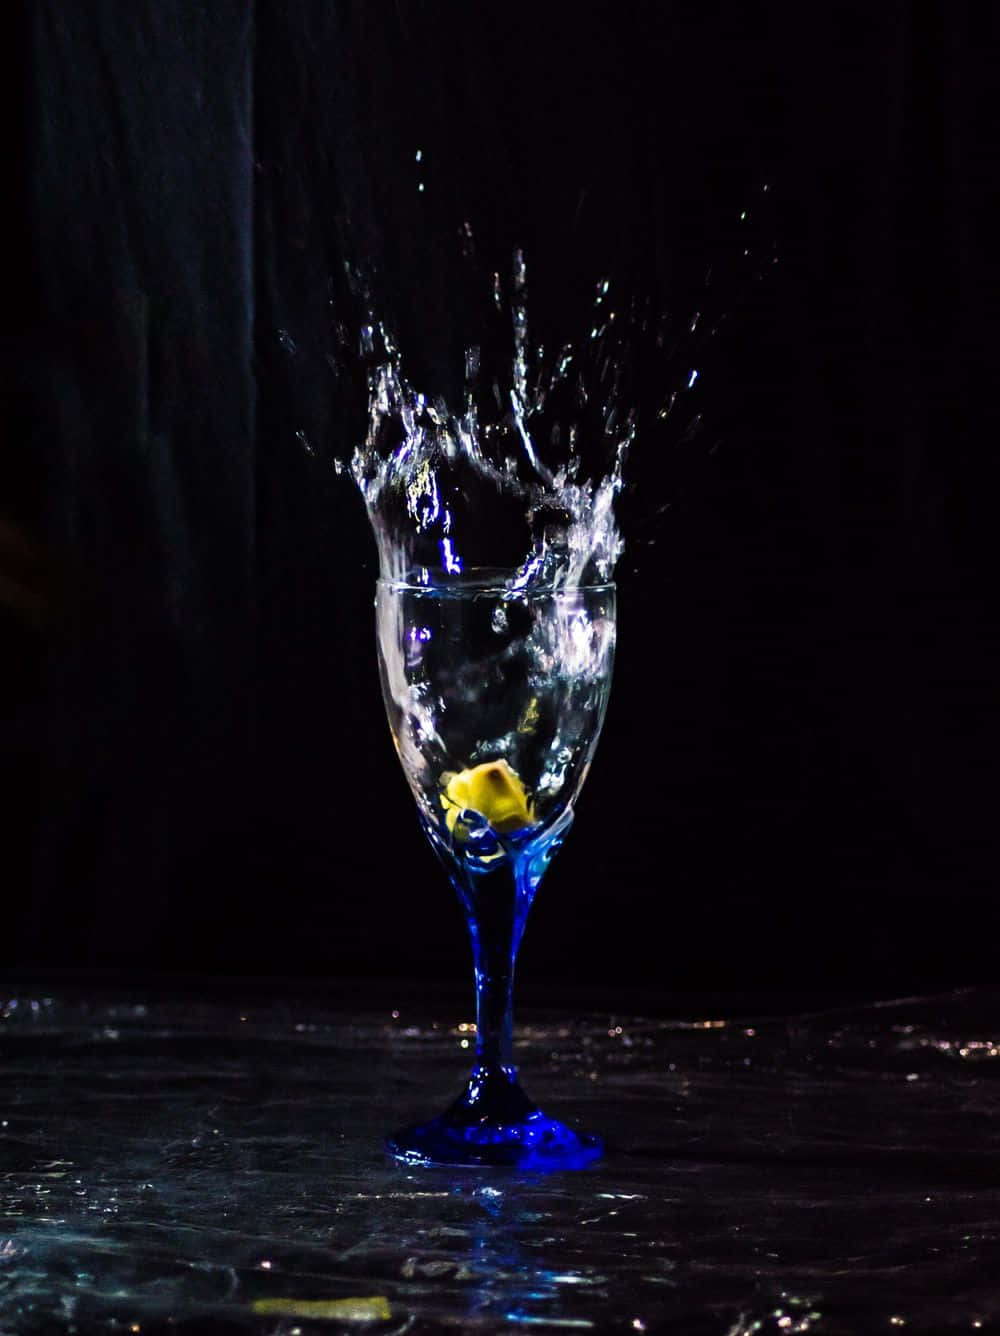 A Glass Of Water Splashing On A Black Background